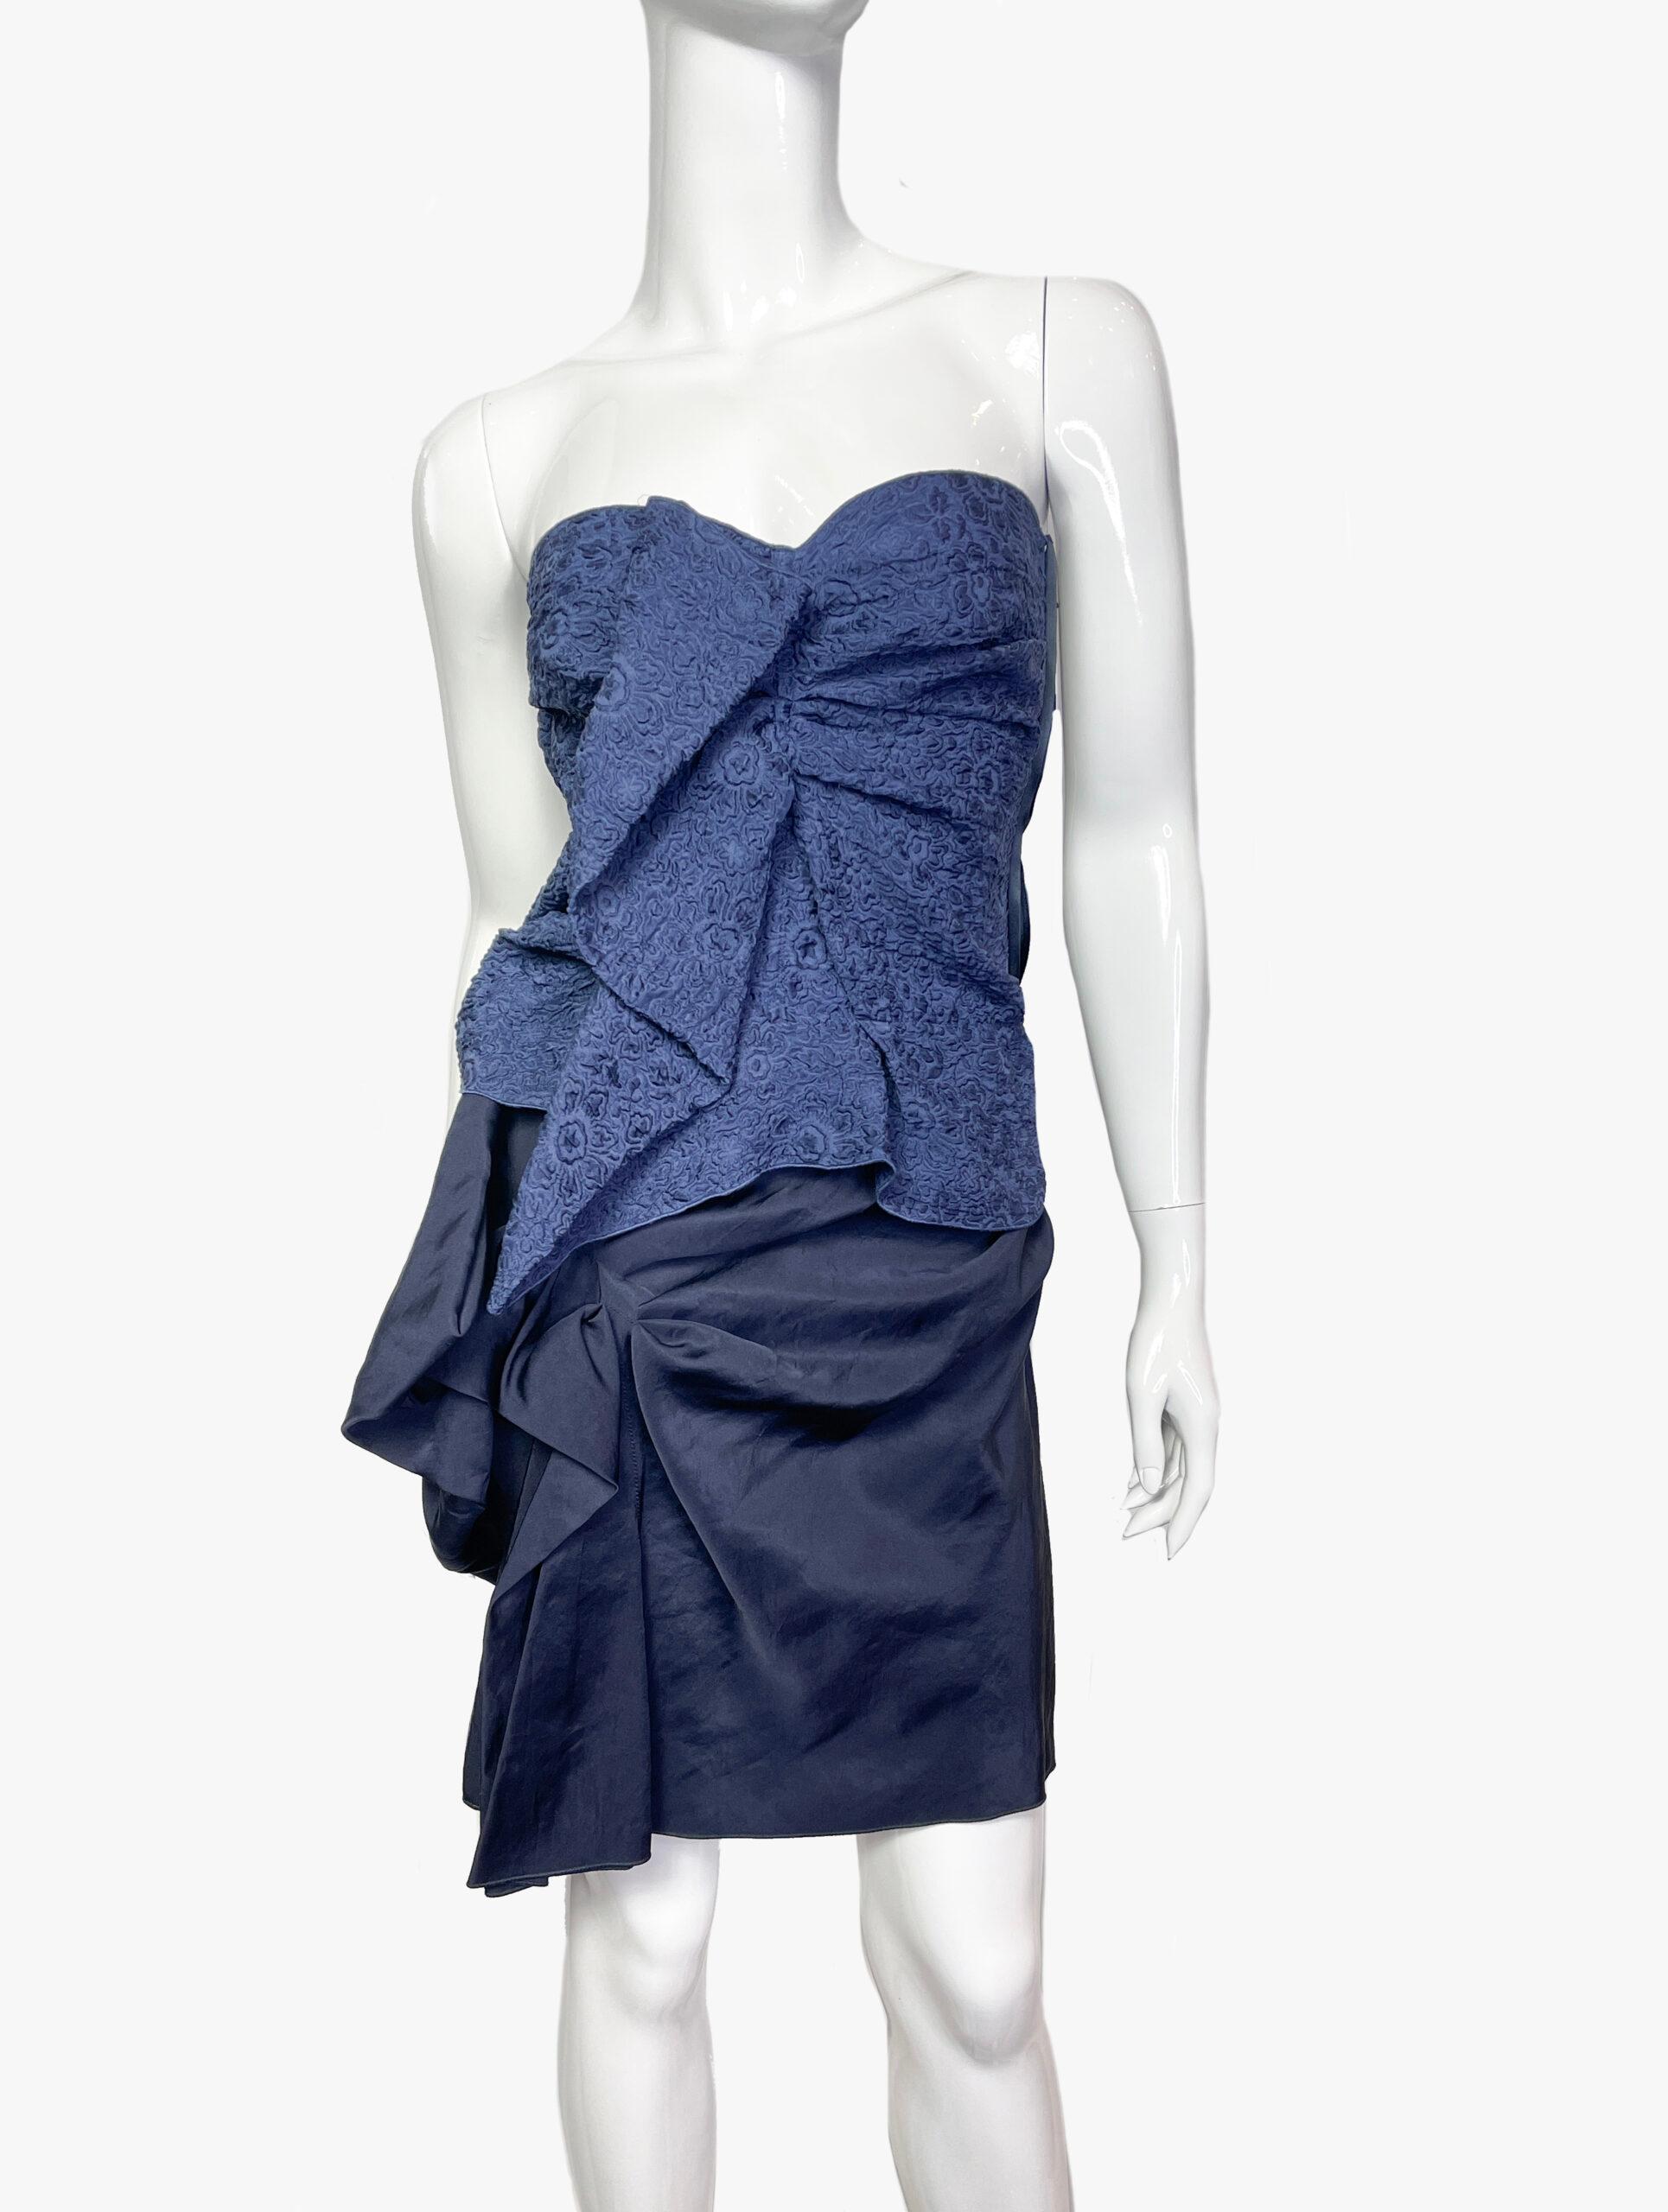 Lanvin dark blue strapless silk dress, stunning draped bustier dress
Collection 2009
Fabric: 100% silk
Size: 36 FR (S)

........Additional information ........

- Photo might be slightly different from actual item in terms of color due to the